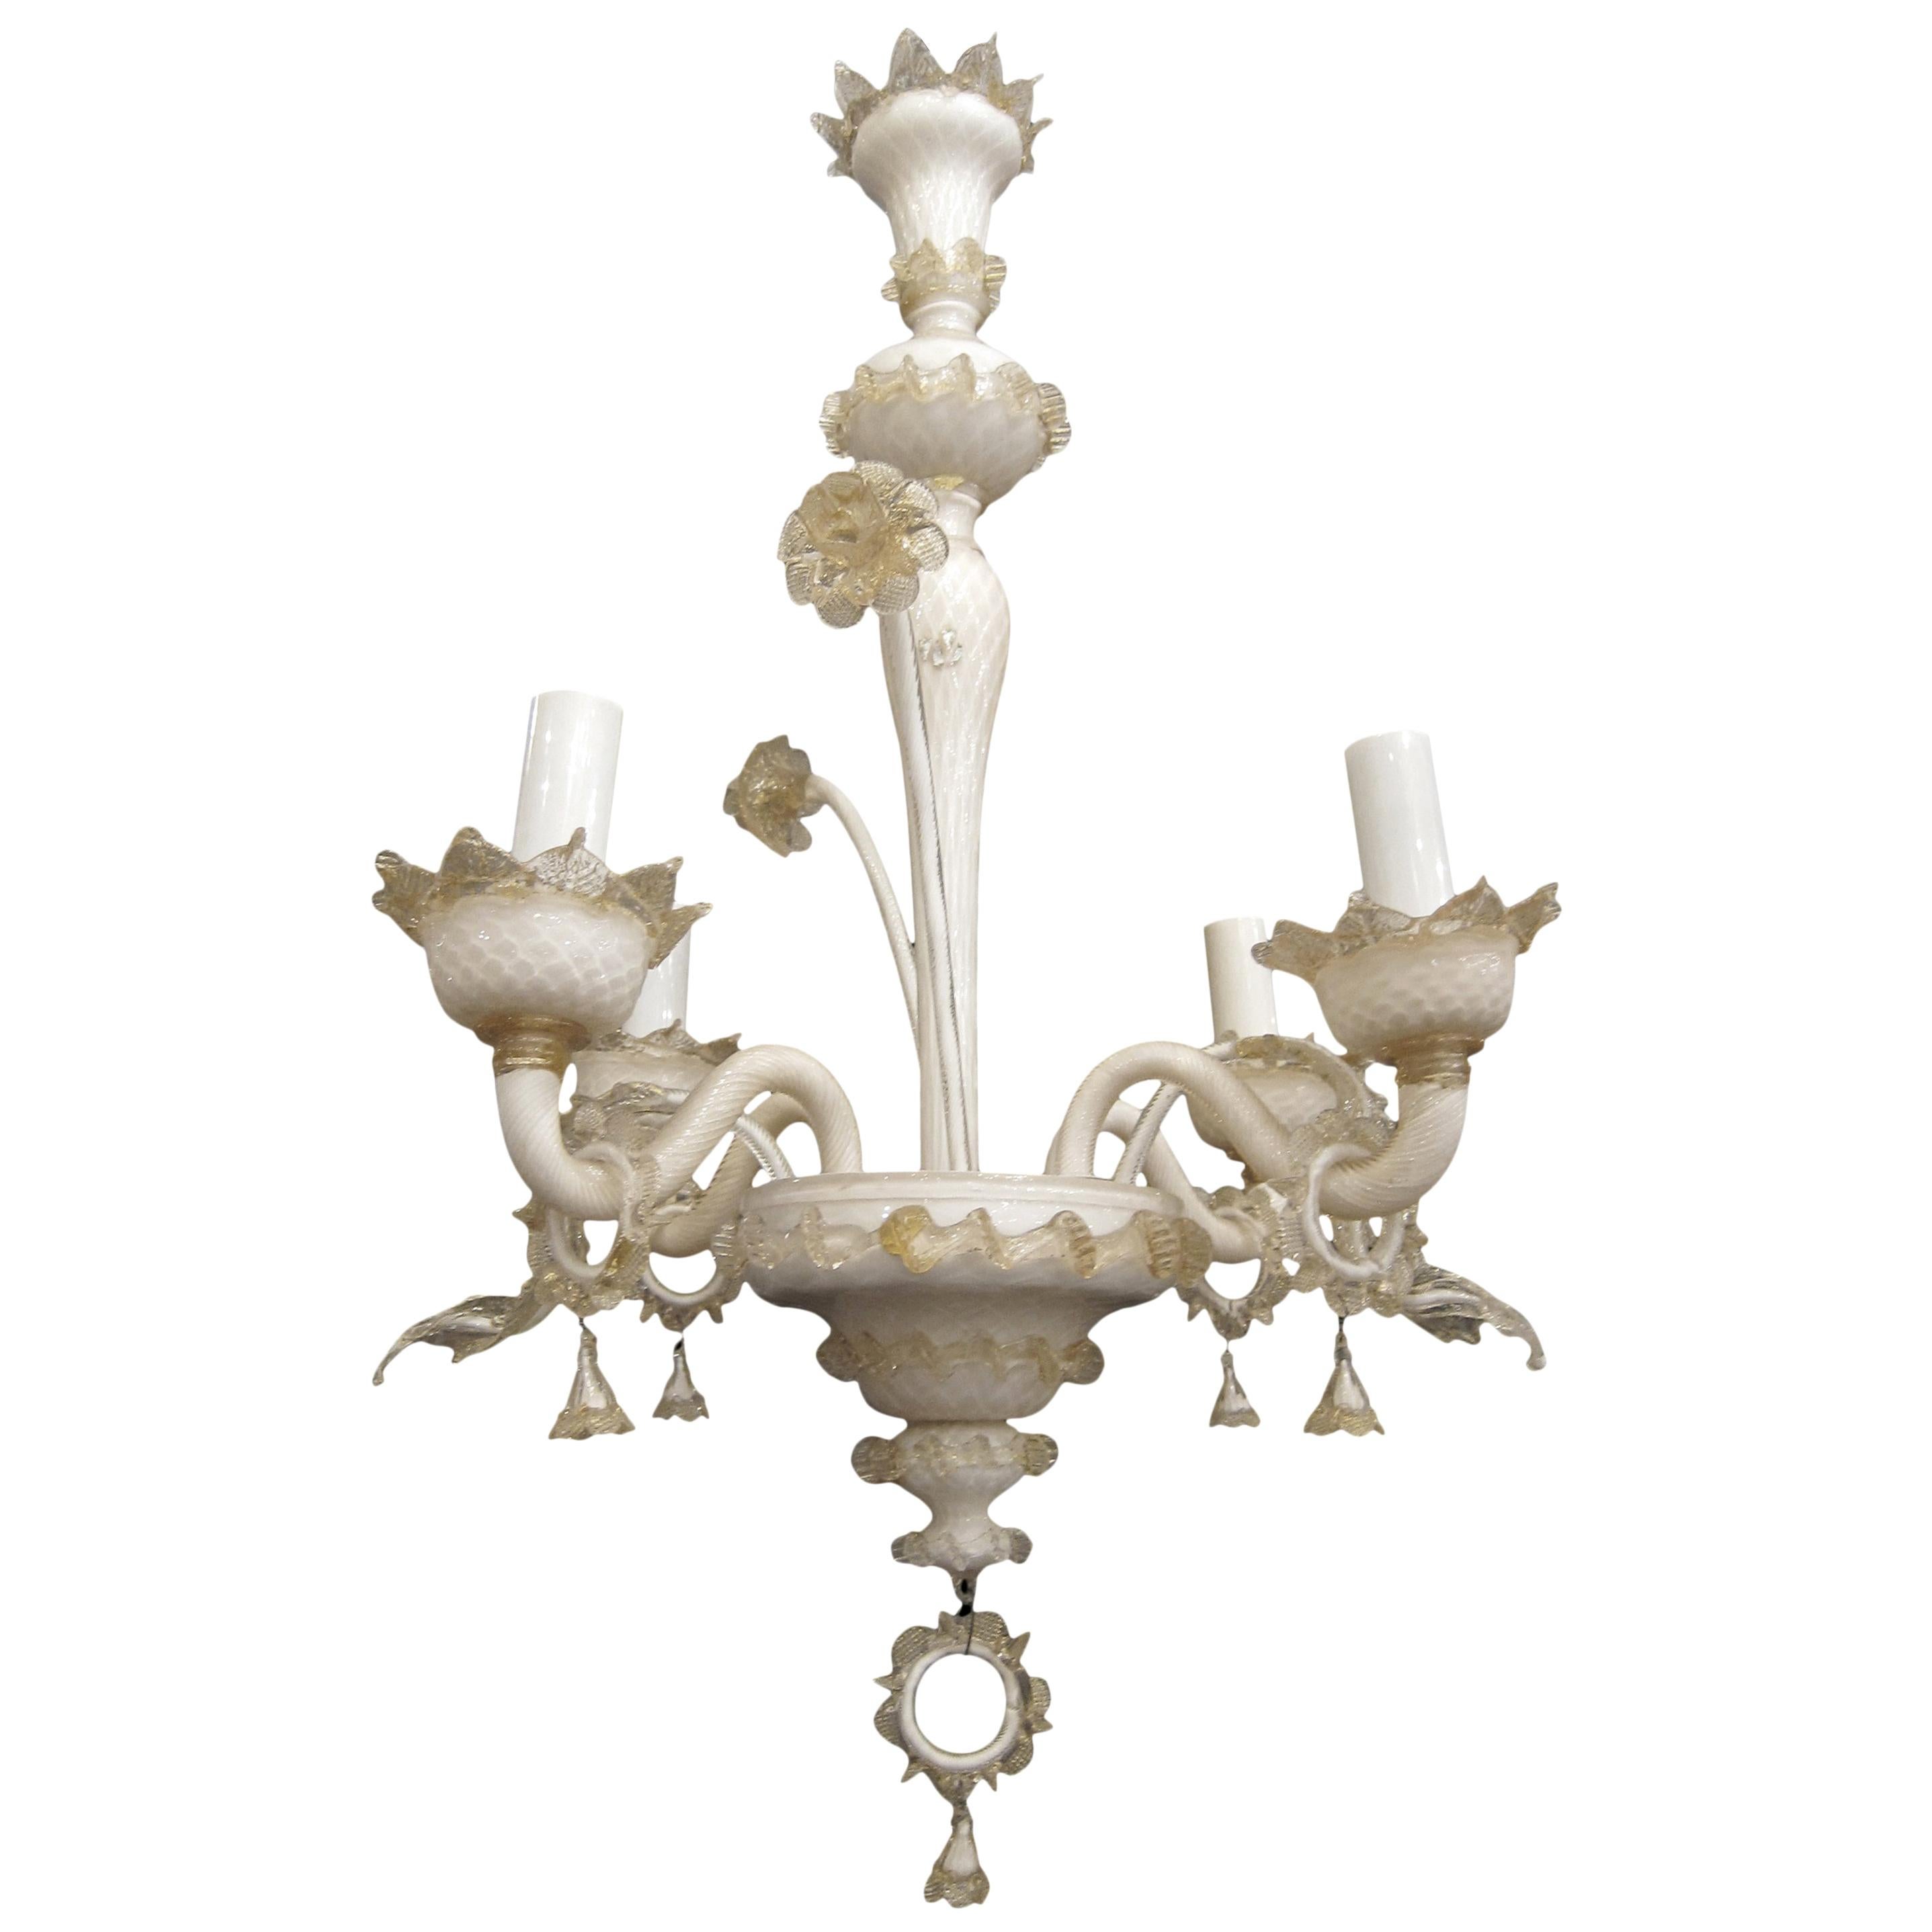 1950s Murano Four-Arm Peach and Off-White Colored Handblown Floral Chandelier